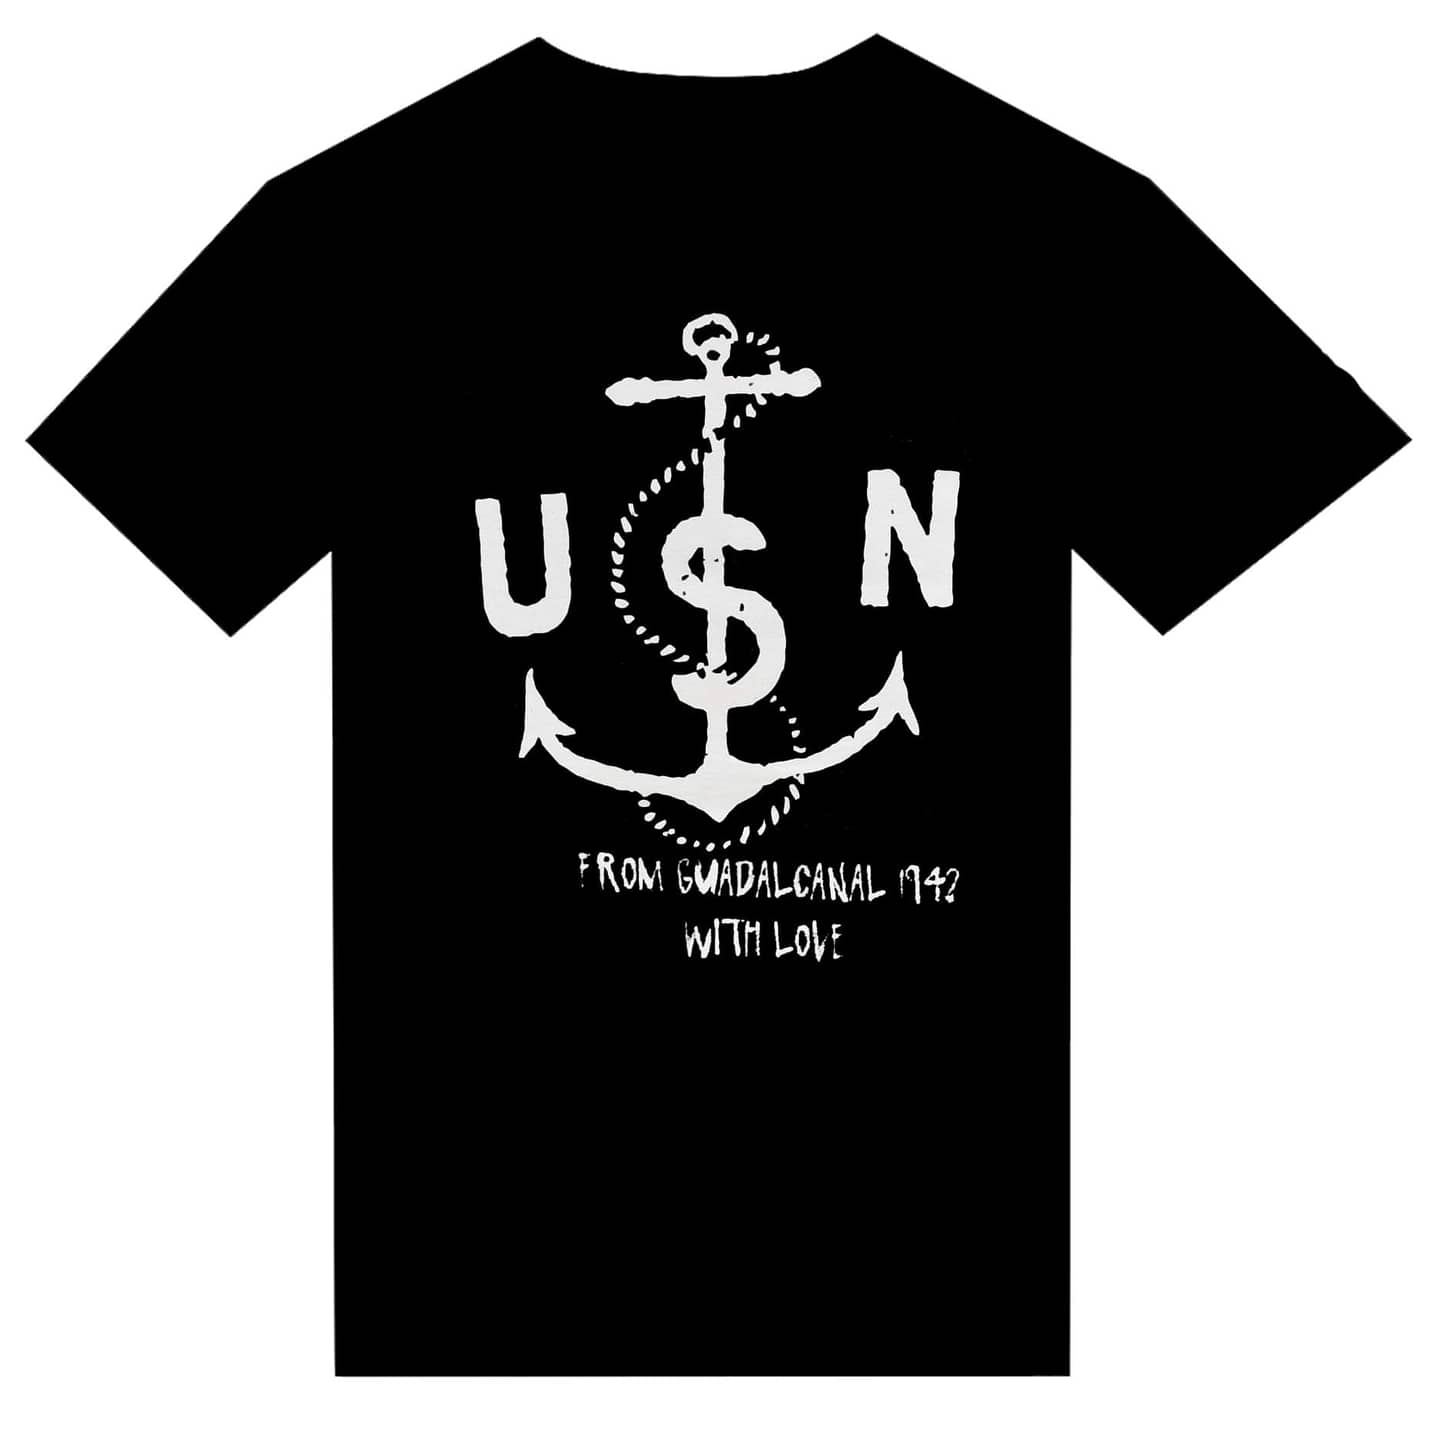 T-shirt "USN From Guadalcanal 1942 with Love"